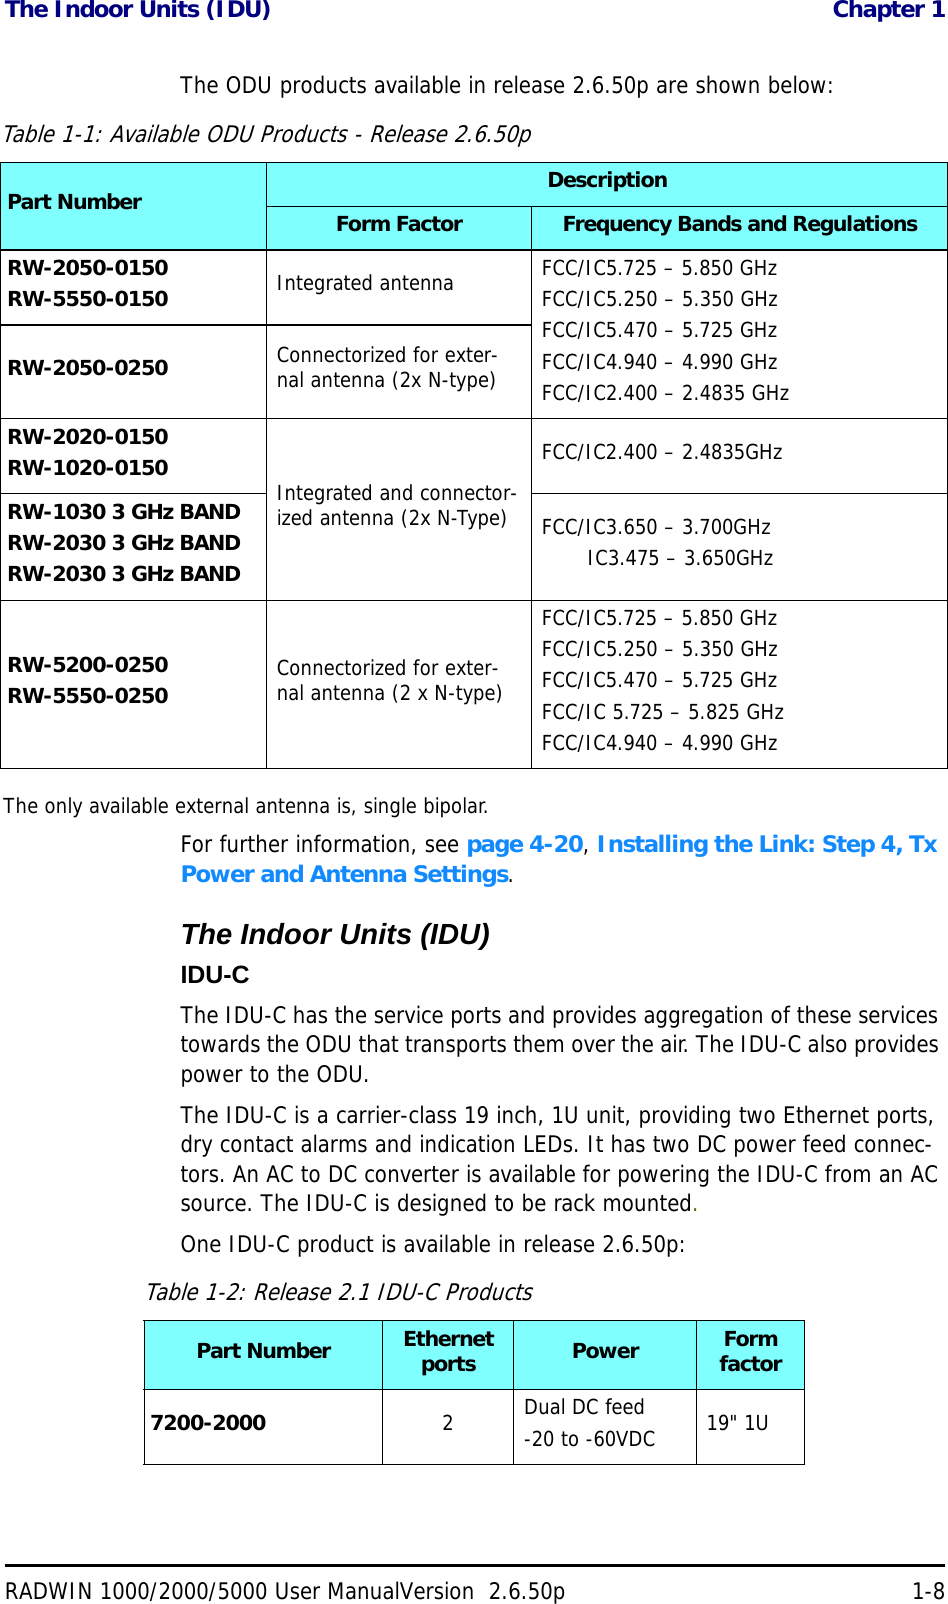 The Indoor Units (IDU)  Chapter 1RADWIN 1000/2000/5000 User ManualVersion  2.6.50p 1-8The ODU products available in release 2.6.50p are shown below:The only available external antenna is, single bipolar.For further information, see page 4-20, Installing the Link: Step 4, Tx Power and Antenna Settings.The Indoor Units (IDU)IDU-CThe IDU-C has the service ports and provides aggregation of these services towards the ODU that transports them over the air. The IDU-C also provides power to the ODU.The IDU-C is a carrier-class 19 inch, 1U unit, providing two Ethernet ports, dry contact alarms and indication LEDs. It has two DC power feed connec-tors. An AC to DC converter is available for powering the IDU-C from an AC source. The IDU-C is designed to be rack mounted.One IDU-C product is available in release 2.6.50p:Table 1-1: Available ODU Products - Release 2.6.50pPart Number DescriptionForm Factor Frequency Bands and RegulationsRW-2050-0150RW-5550-0150 Integrated antenna  FCC/IC5.725 – 5.850 GHzFCC/IC5.250 – 5.350 GHzFCC/IC5.470 – 5.725 GHzFCC/IC4.940 – 4.990 GHzFCC/IC2.400 – 2.4835 GHzRW-2050-0250 Connectorized for exter-nal antenna (2x N-type)RW-2020-0150RW-1020-0150 Integrated and connector-ized antenna (2x N-Type)FCC/IC2.400 – 2.4835GHzRW-1030 3 GHz BANDRW-2030 3 GHz BANDRW-2030 3 GHz BANDFCC/IC3.650 – 3.700GHz       IC3.475 – 3.650GHzRW-5200-0250RW-5550-0250 Connectorized for exter-nal antenna (2 x N-type)FCC/IC5.725 – 5.850 GHzFCC/IC5.250 – 5.350 GHzFCC/IC5.470 – 5.725 GHzFCC/IC 5.725 – 5.825 GHzFCC/IC4.940 – 4.990 GHzTable 1-2: Release 2.1 IDU-C ProductsPart Number Ethernet ports Power Form factor7200-2000 2Dual DC feed-20 to -60VDC 19&quot; 1U